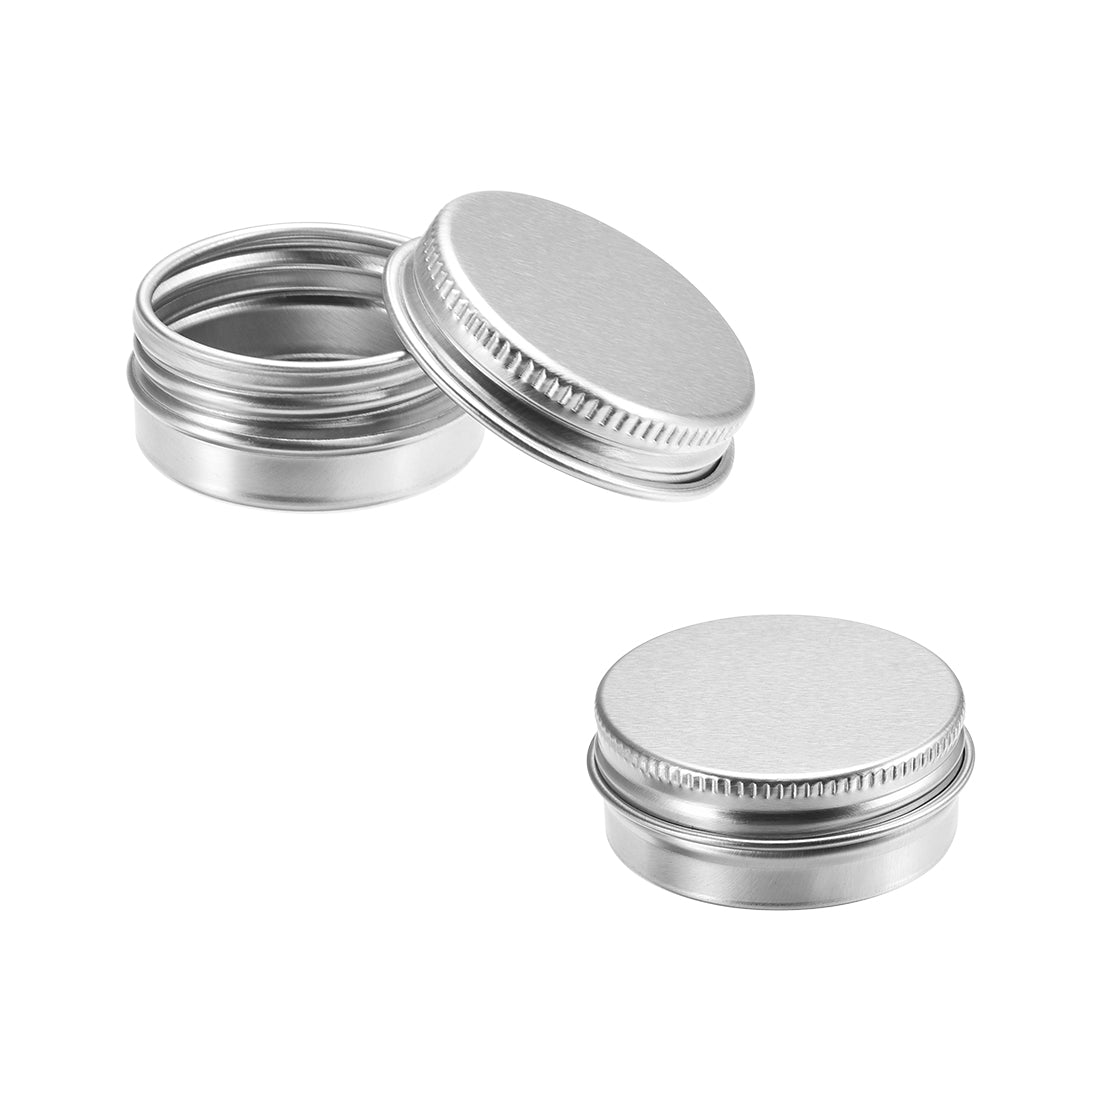 uxcell Uxcell 0.33 oz Round Aluminum Cans Tin Can Screw Top Metal Lid Containers 1ml, 12pcs